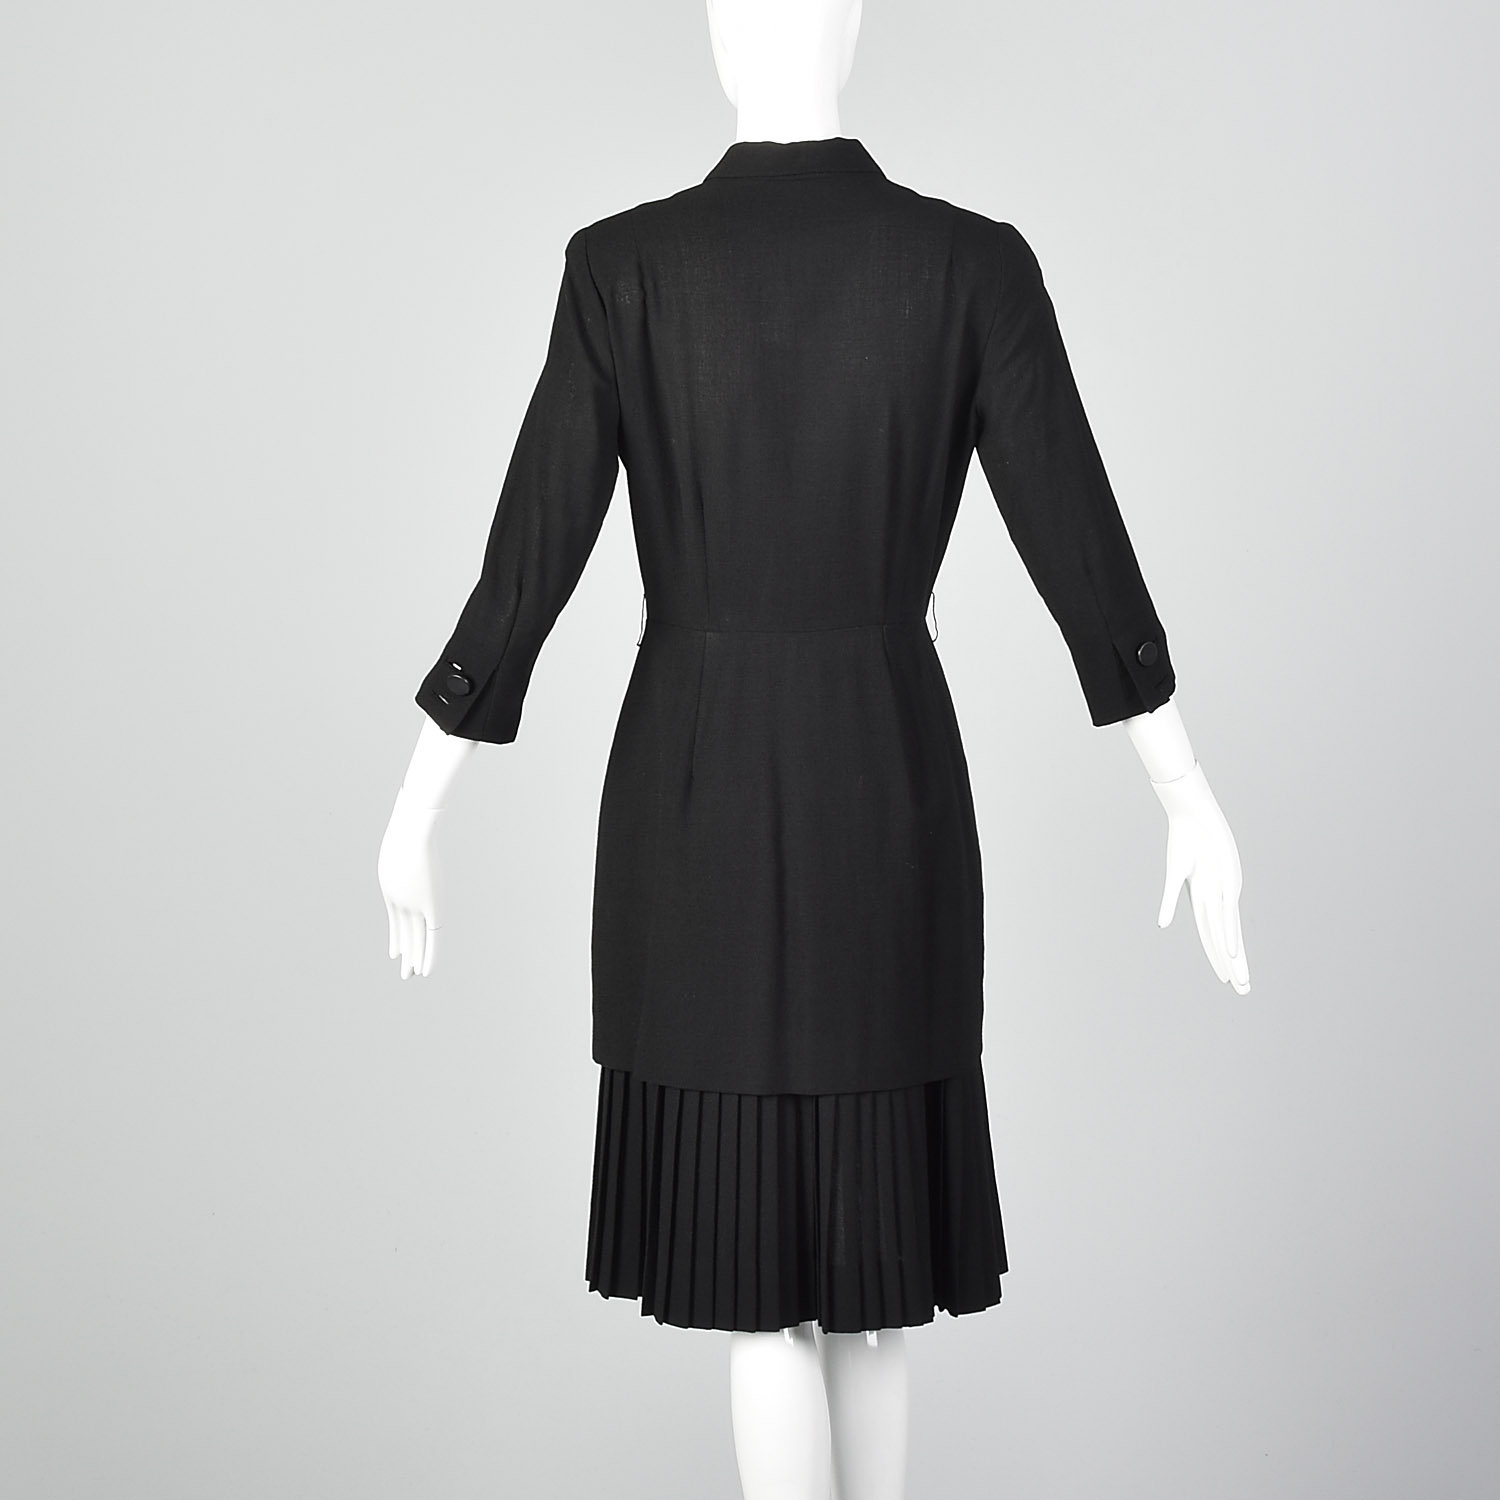 Small 1950s Black Dress With Button up Front and Pleated - Etsy